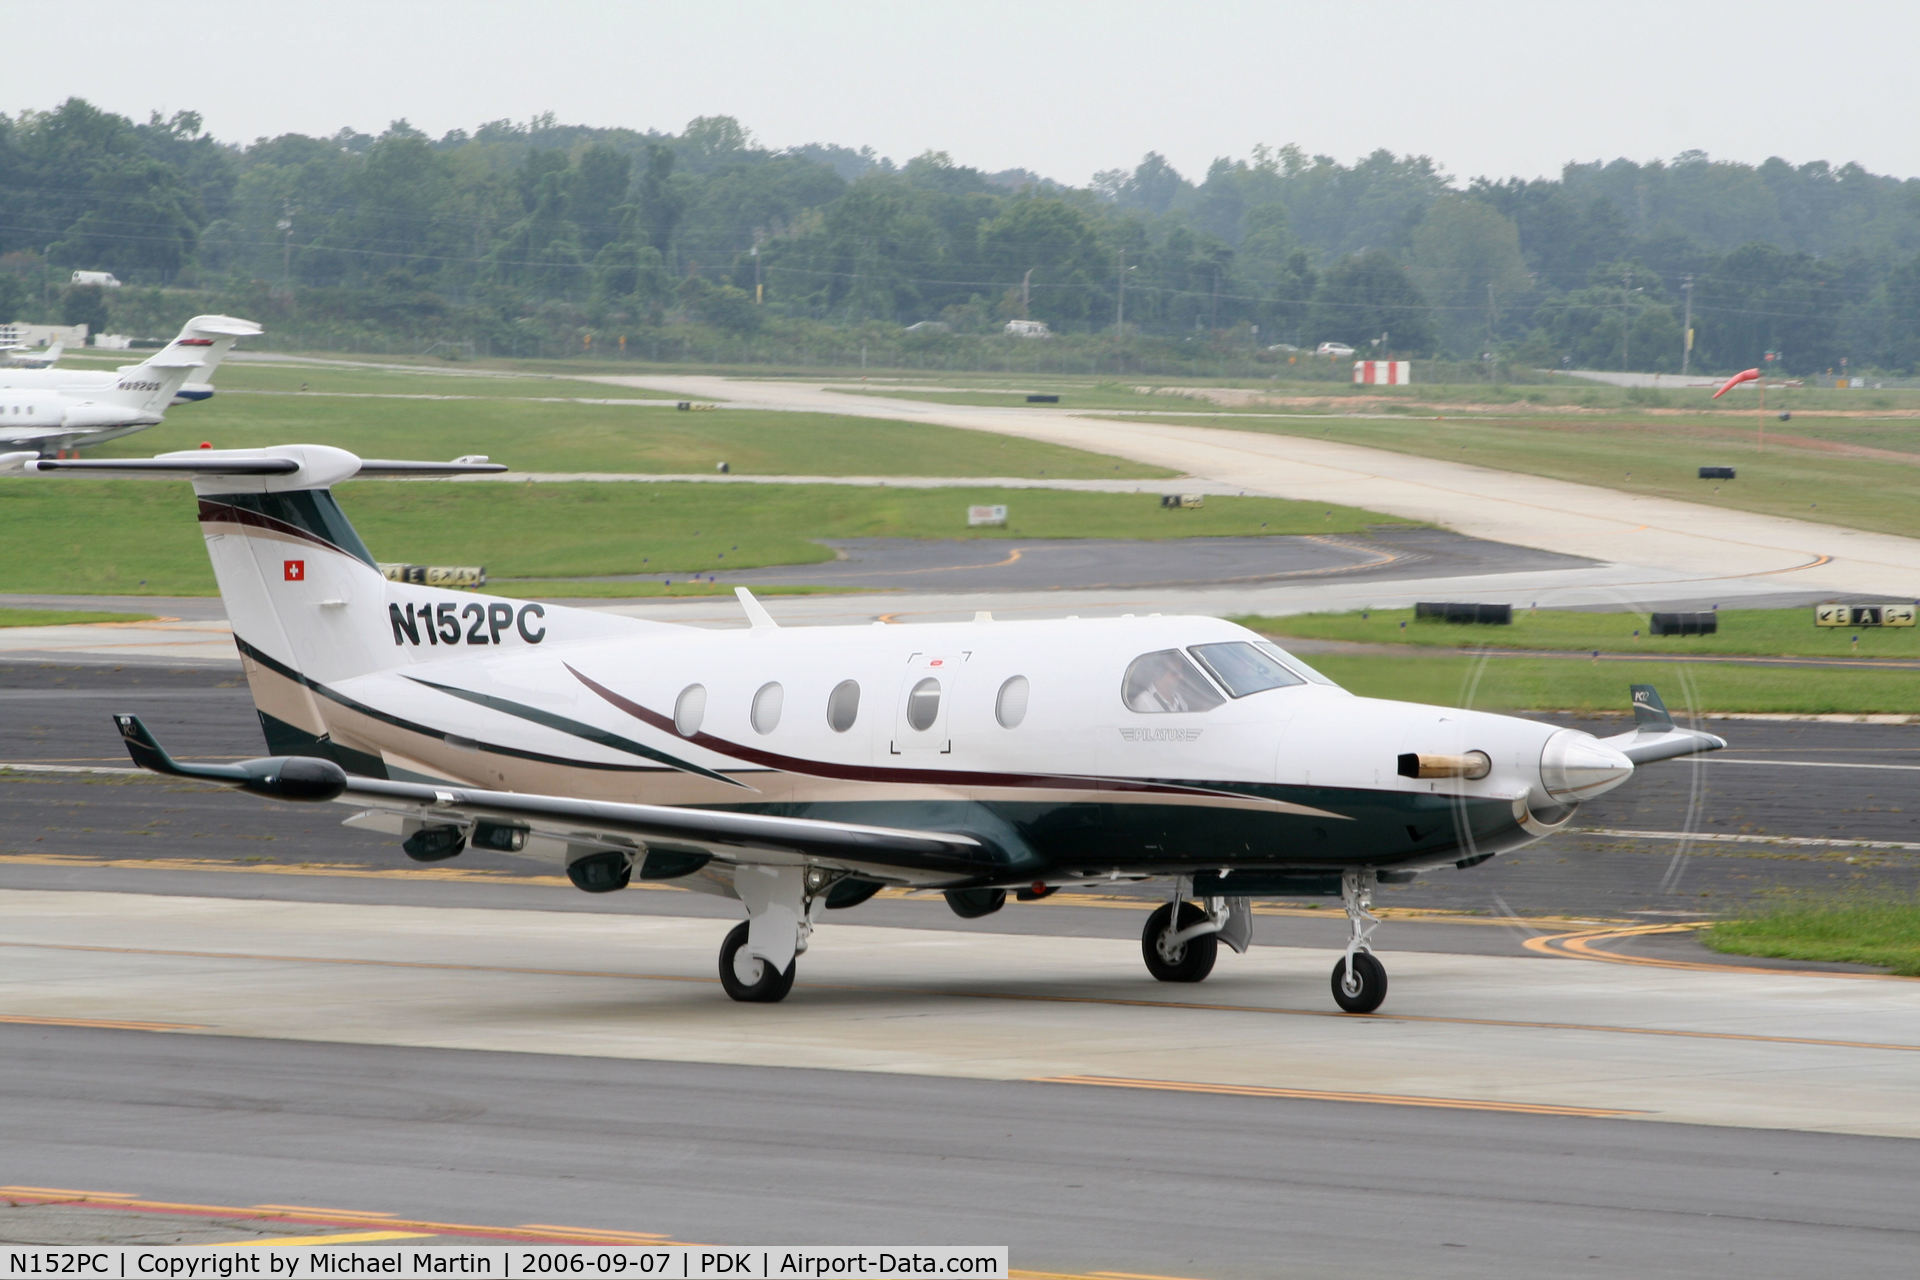 N152PC, 2004 Pilatus PC-12/45 C/N 552, Taxing from Epps Air Service